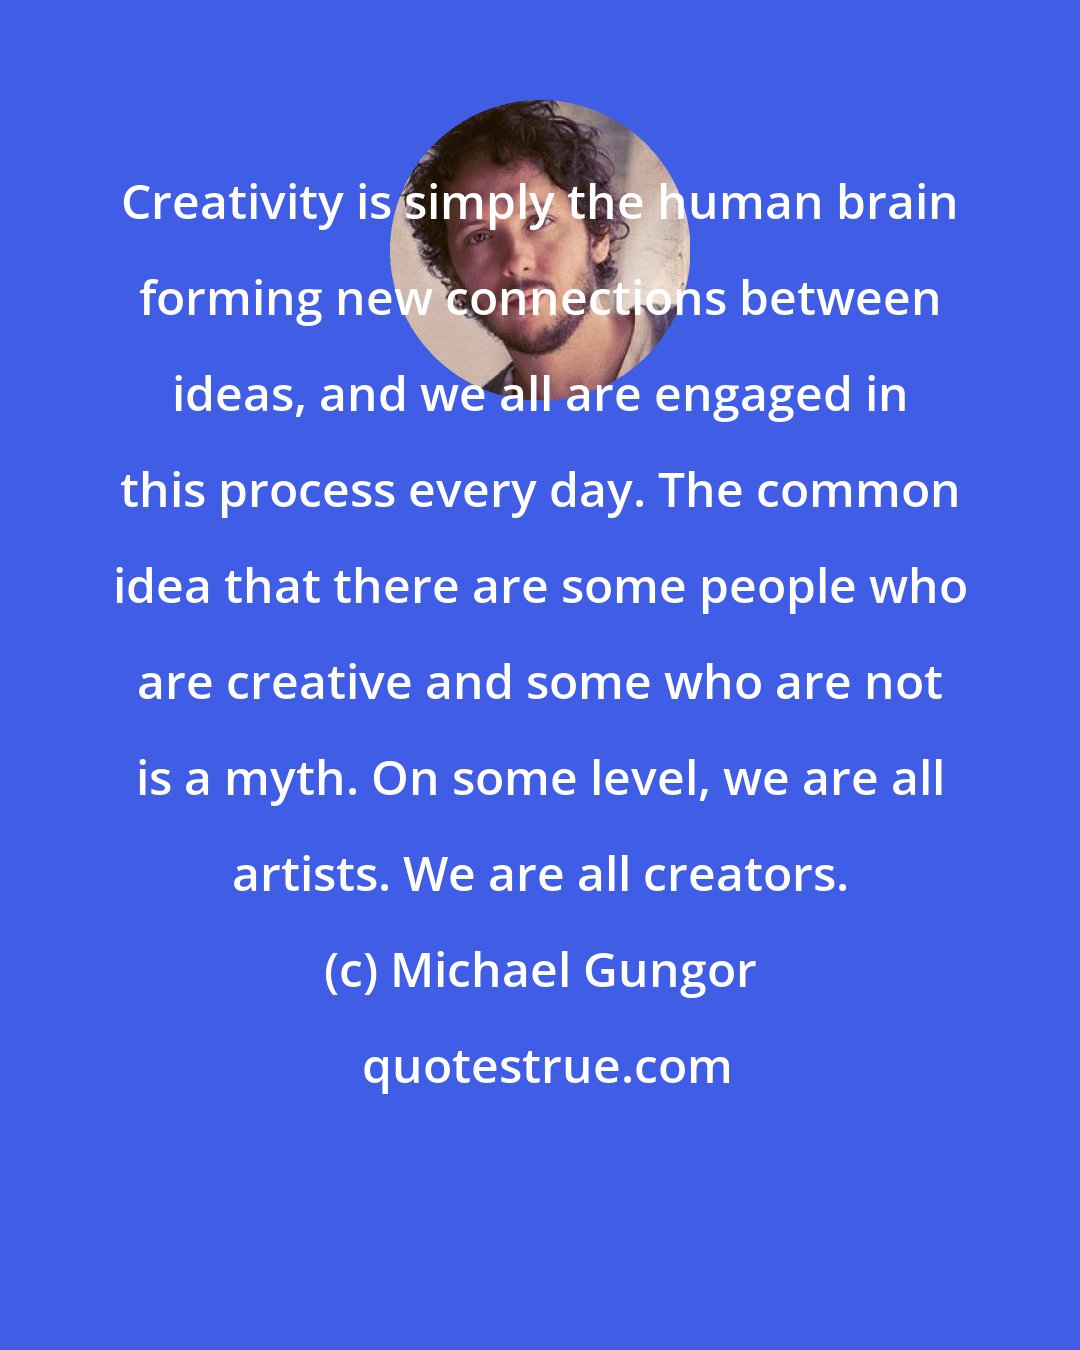 Michael Gungor: Creativity is simply the human brain forming new connections between ideas, and we all are engaged in this process every day. The common idea that there are some people who are creative and some who are not is a myth. On some level, we are all artists. We are all creators.